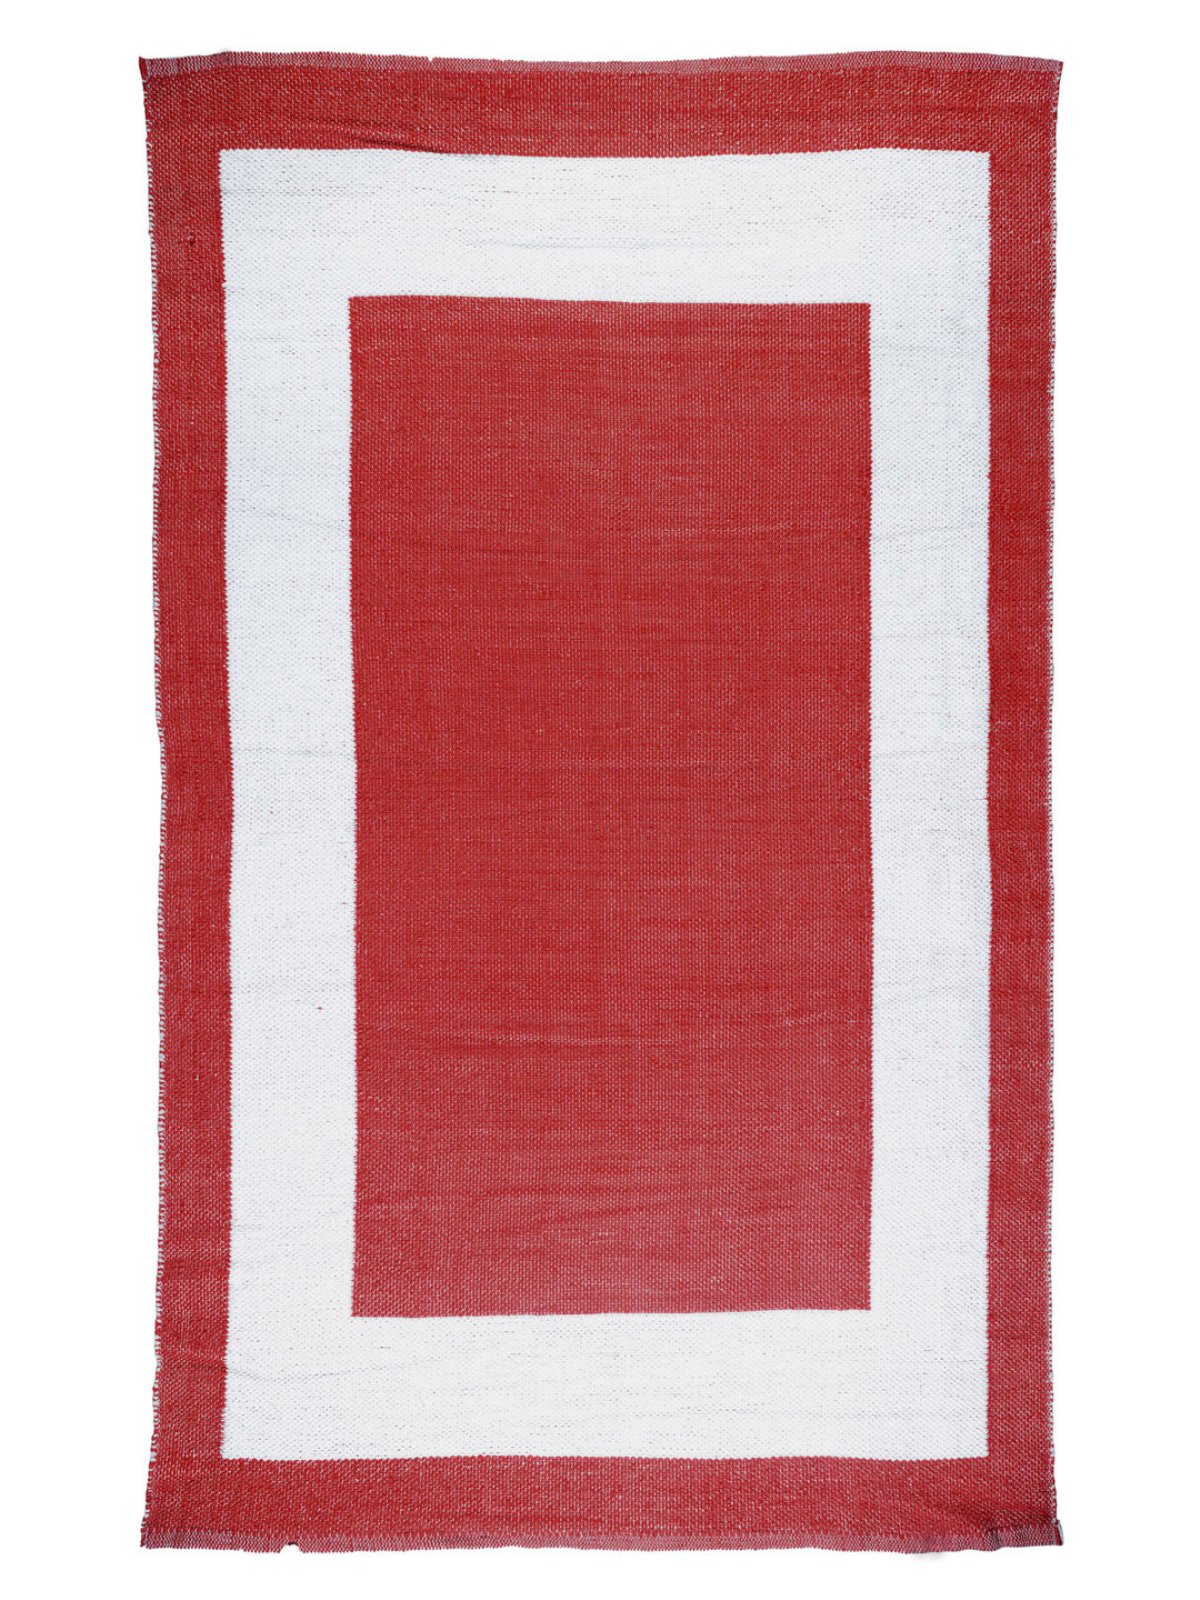 Red & White 3 ft x 5 ft Geometric Patterned Dhurrie